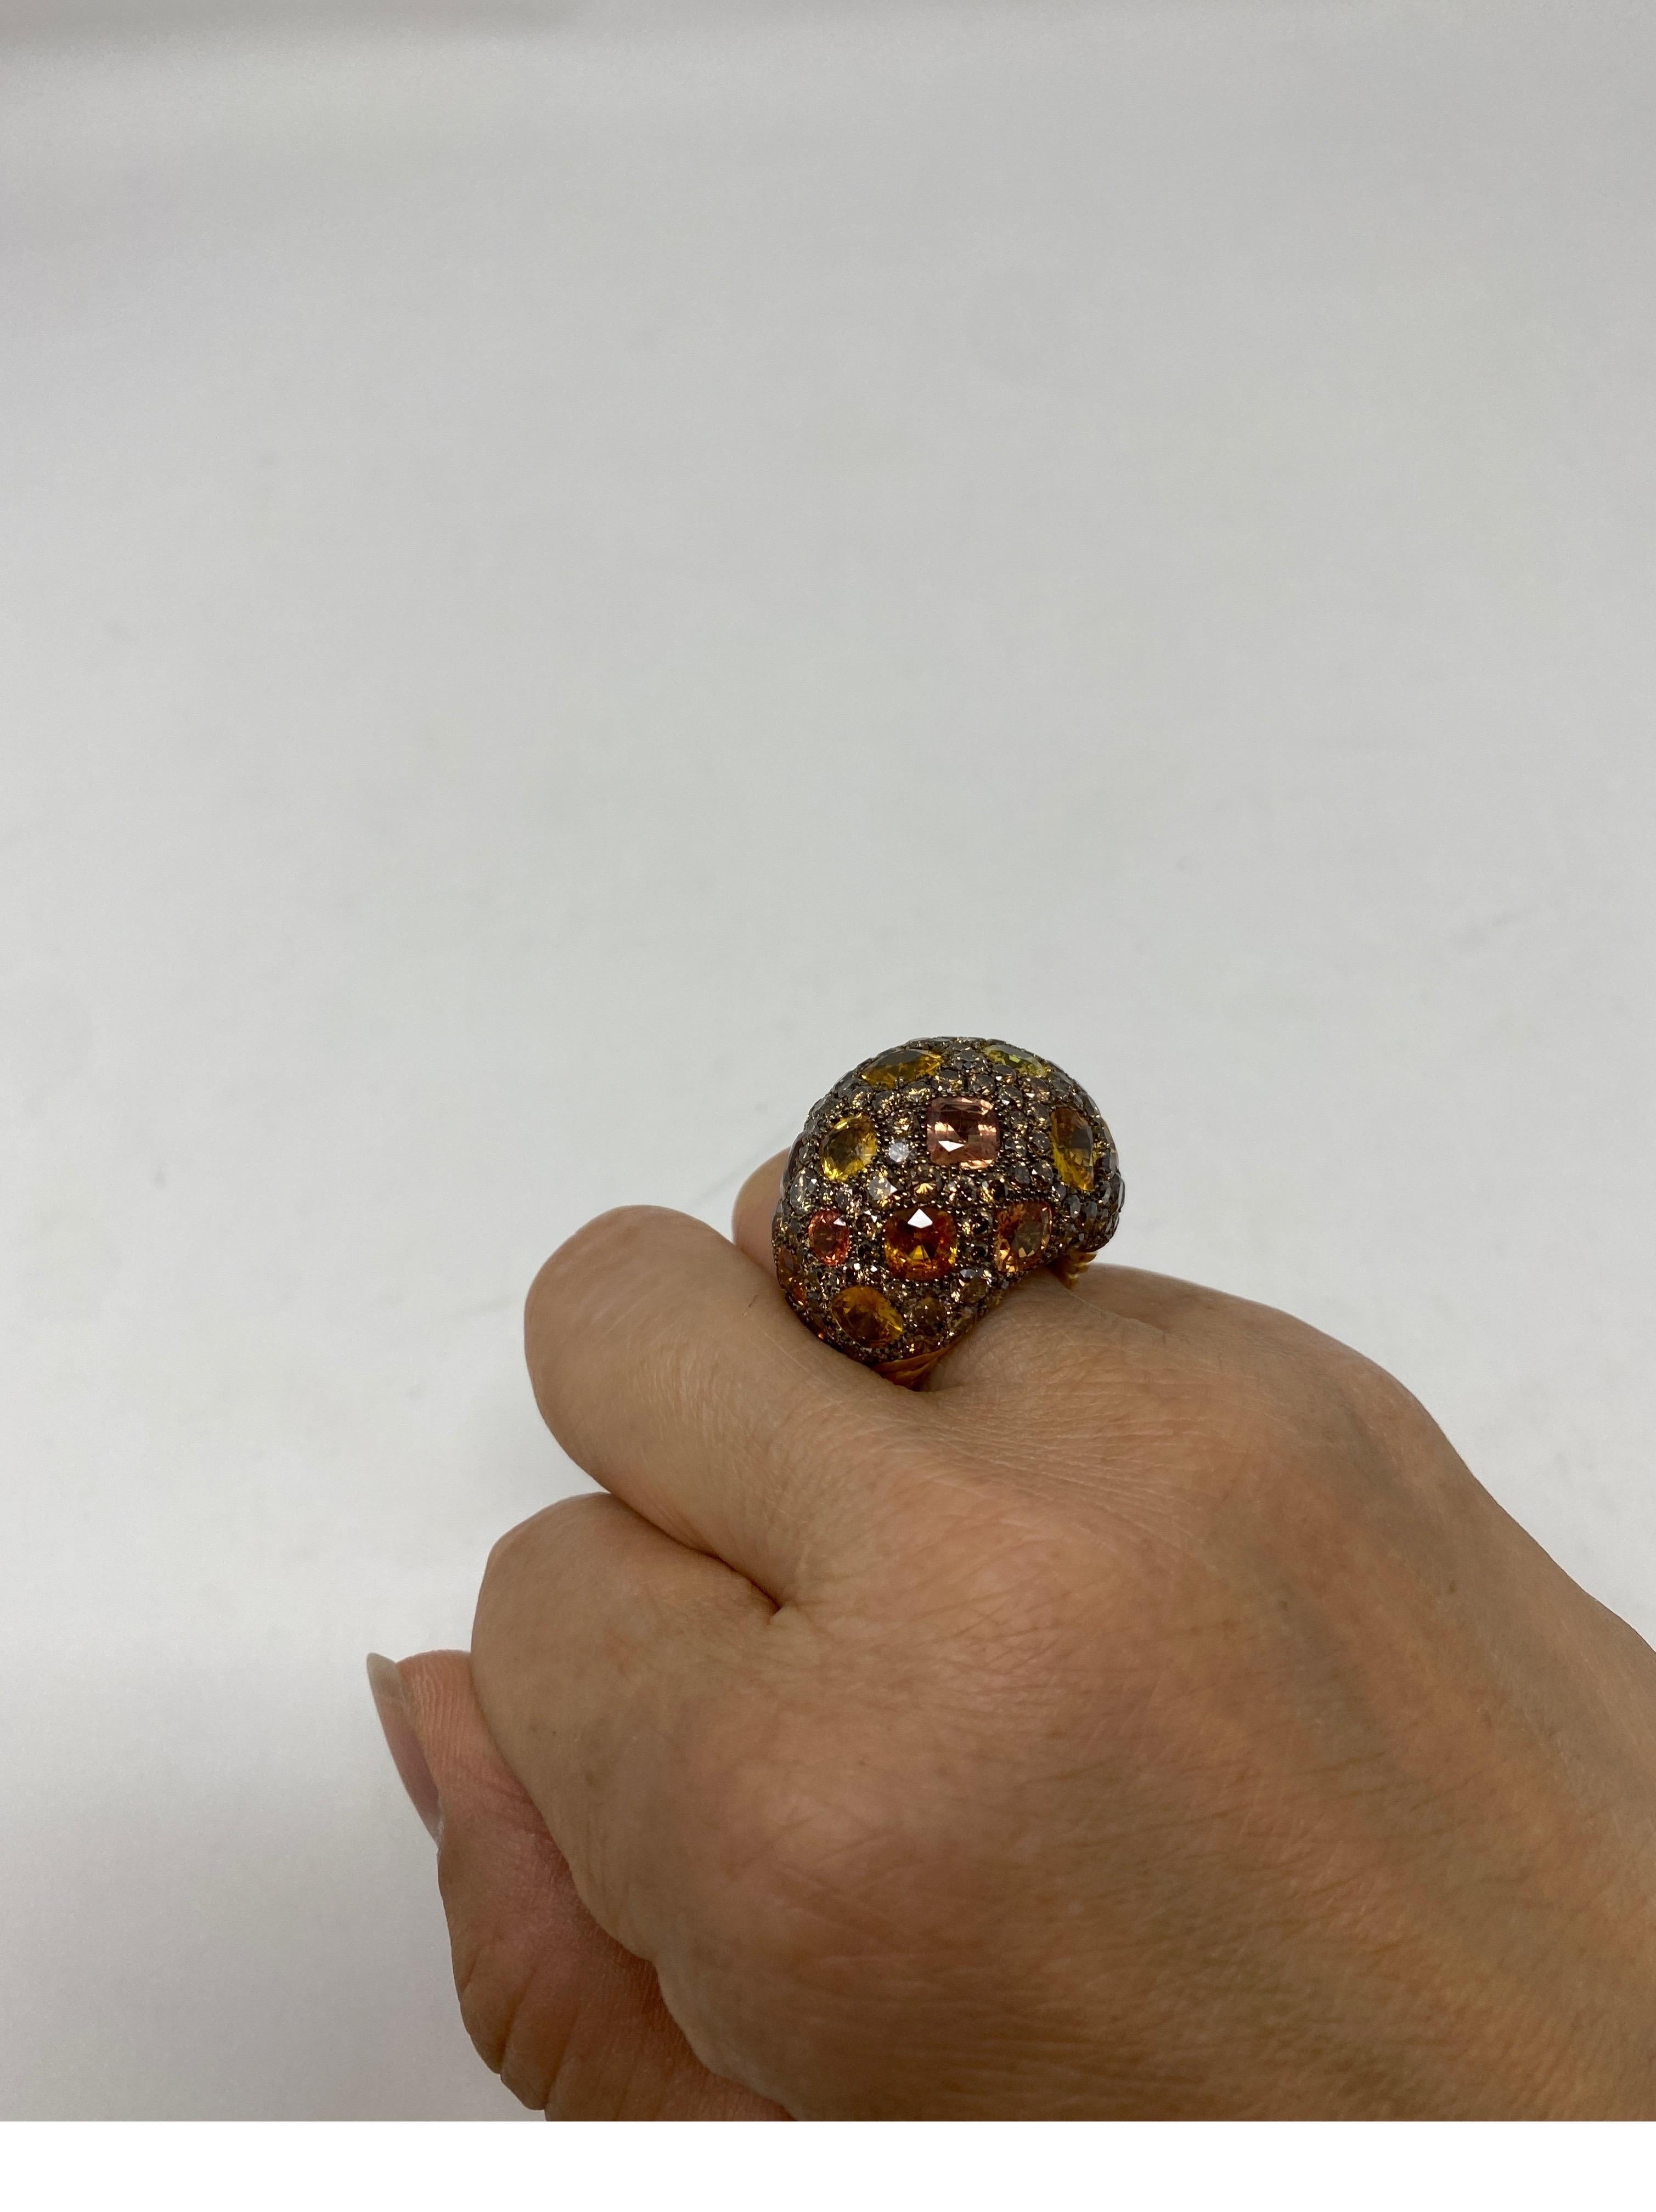 David Yurman Rose Cut Diamonds Ring. 18 kt yellow gold. Size 5. Multi color genuine stones set with rose cut diamonds. Retail over $36,000. Brand new condition. Never used. Guaranteed authentic. 